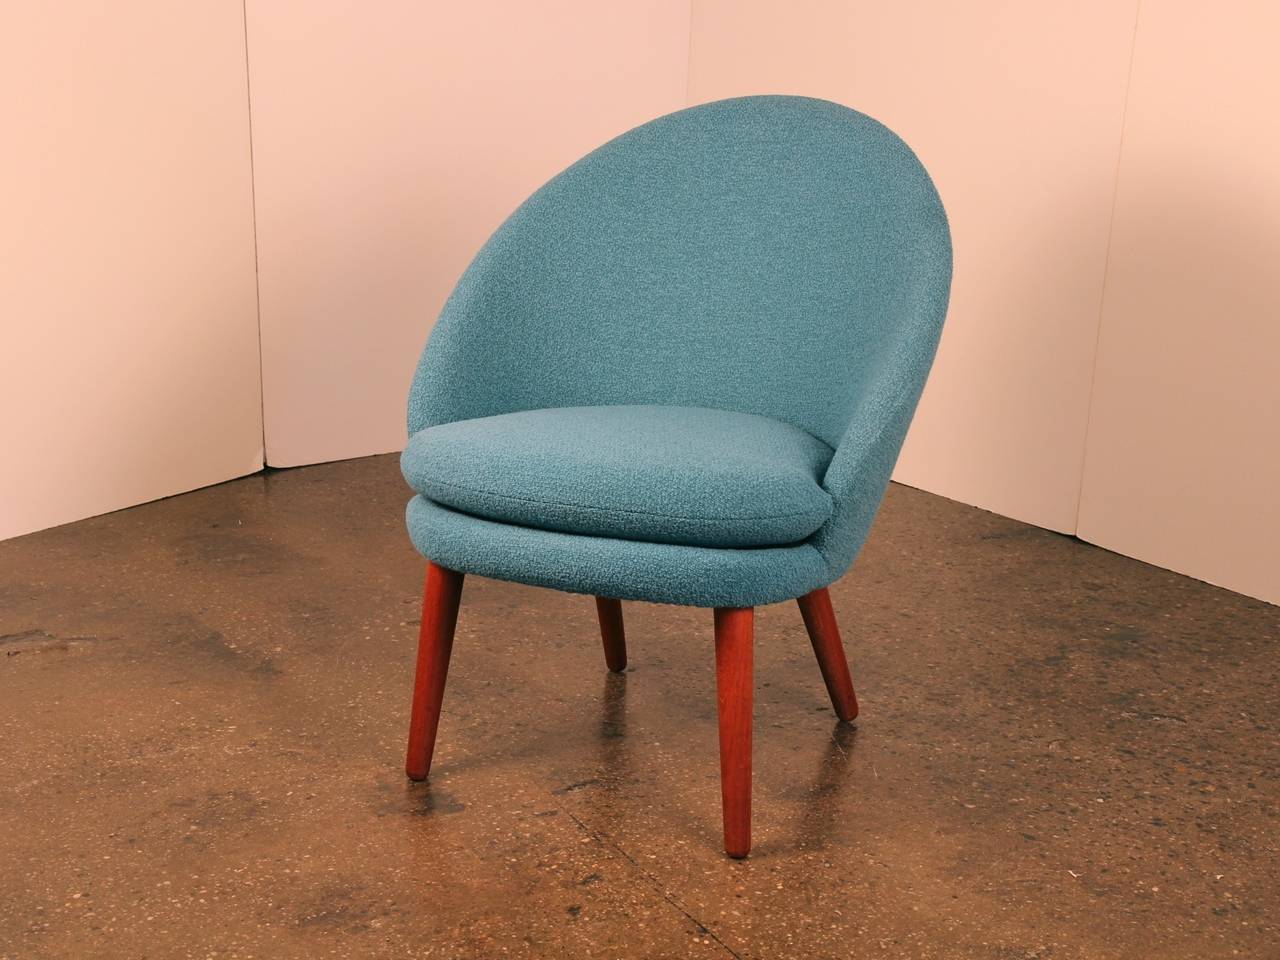 Danish modern easy chair strikes an elegant pose. This beauty is newly recovered in Knoll Classic Bouclé in Aegean. Teak legs have a hand-rubbed oil finish. Designed by Ejvind Johansson. Denmark, 1950s.

25